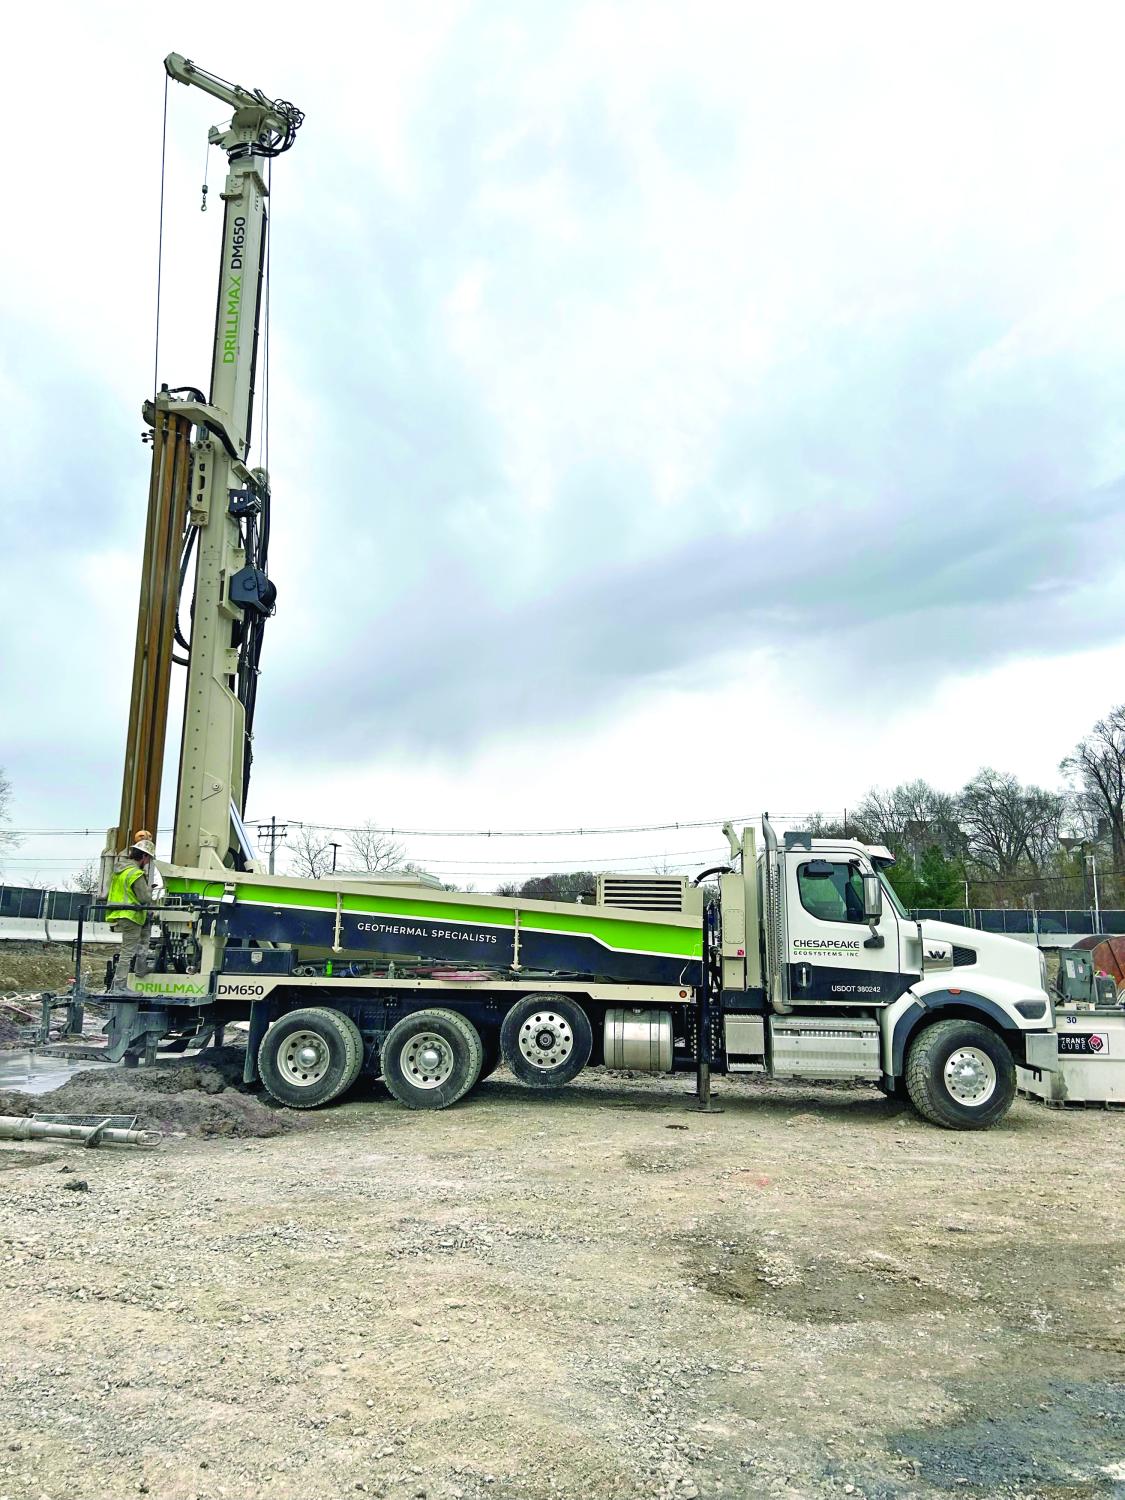 Production efficiency of DM650 air drilling rigs combined with industry-leading manufacturer's service support provides solid solution for geothermal energy projects..